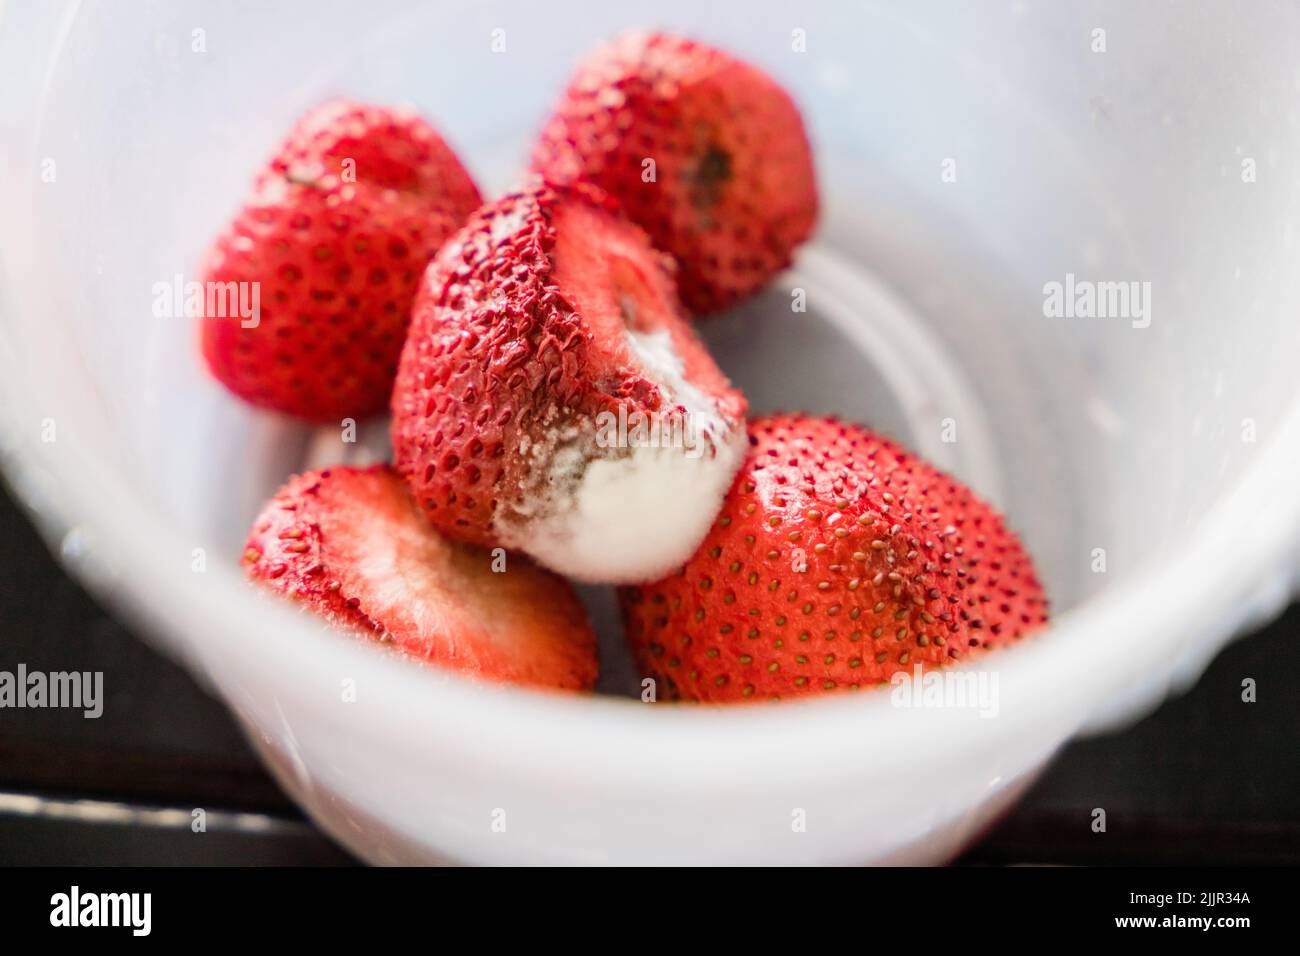 Strawberry with mold 9436934 Stock Photo at Vecteezy